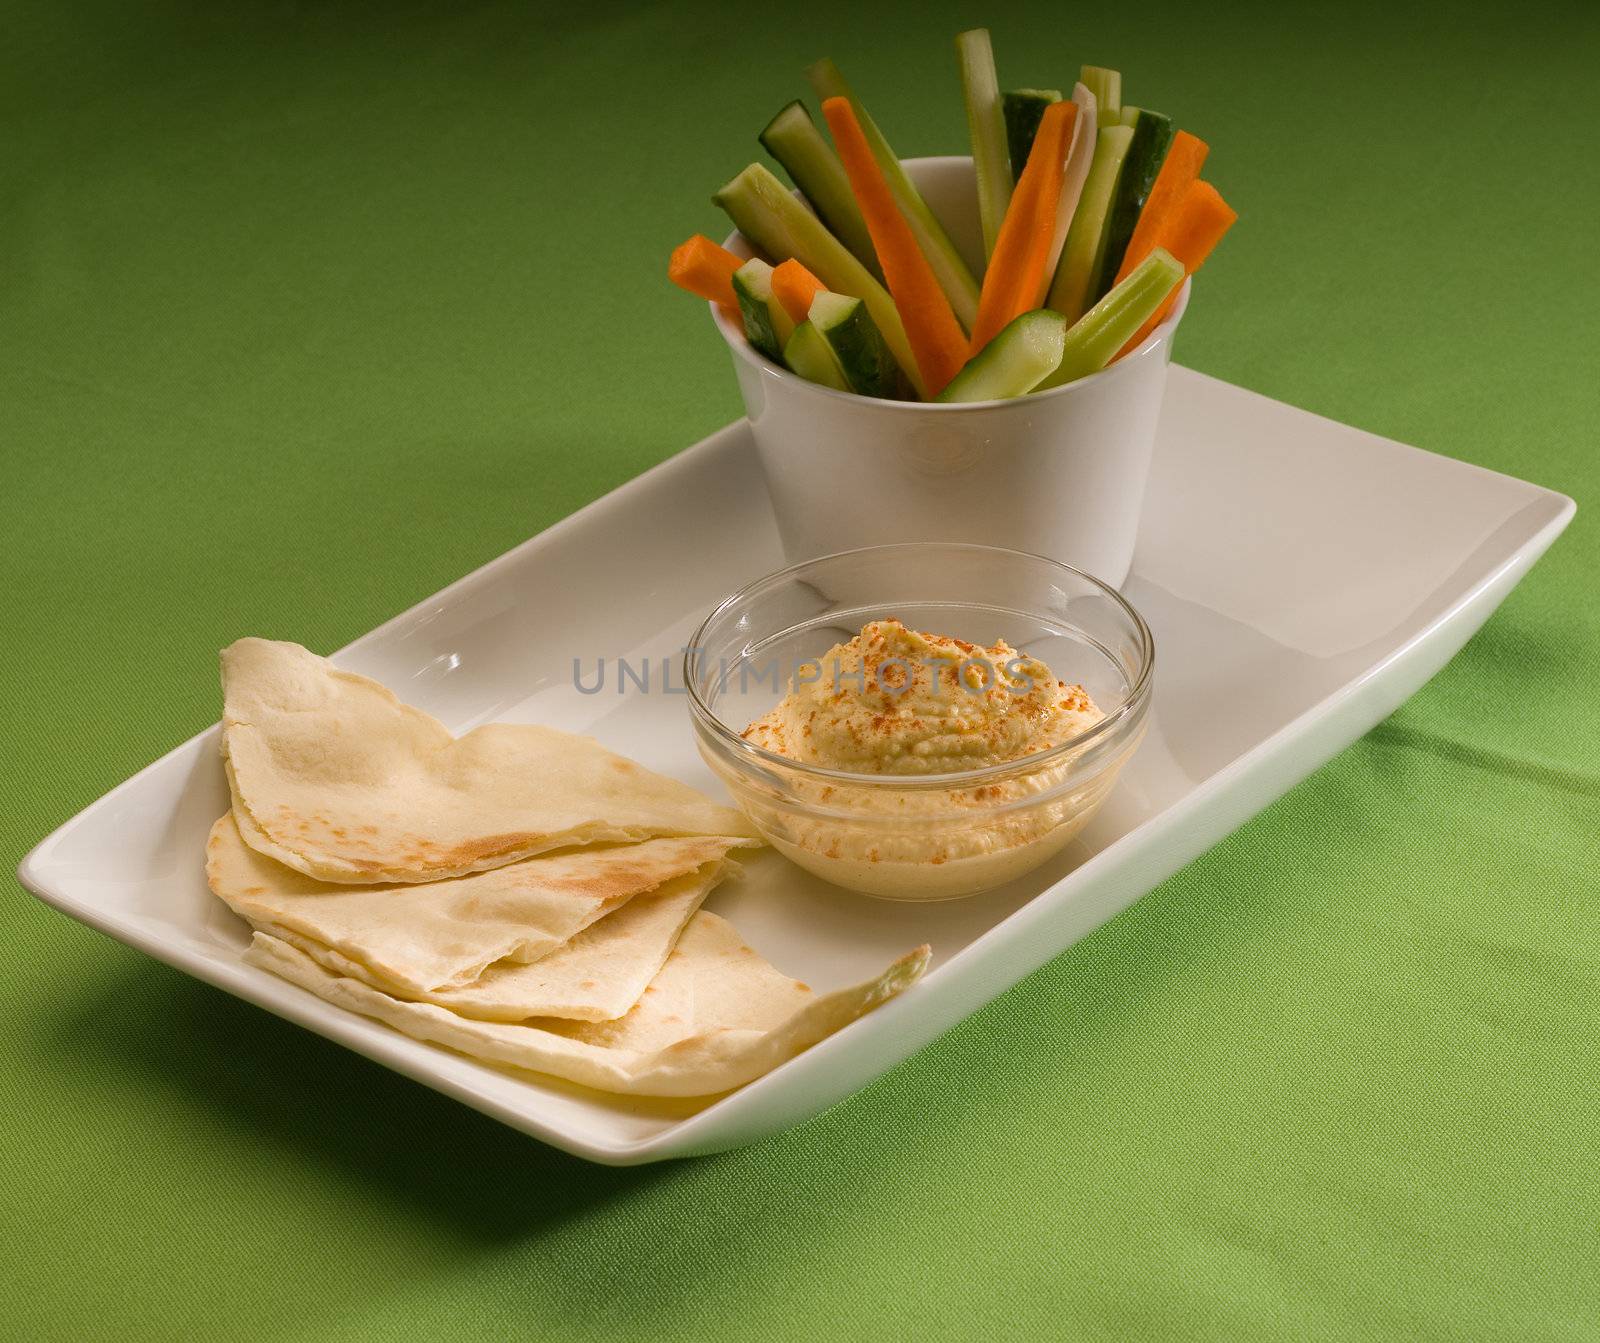 middle eastern hummus dip on a glass bowl with homemade pita brad and raw vegetable